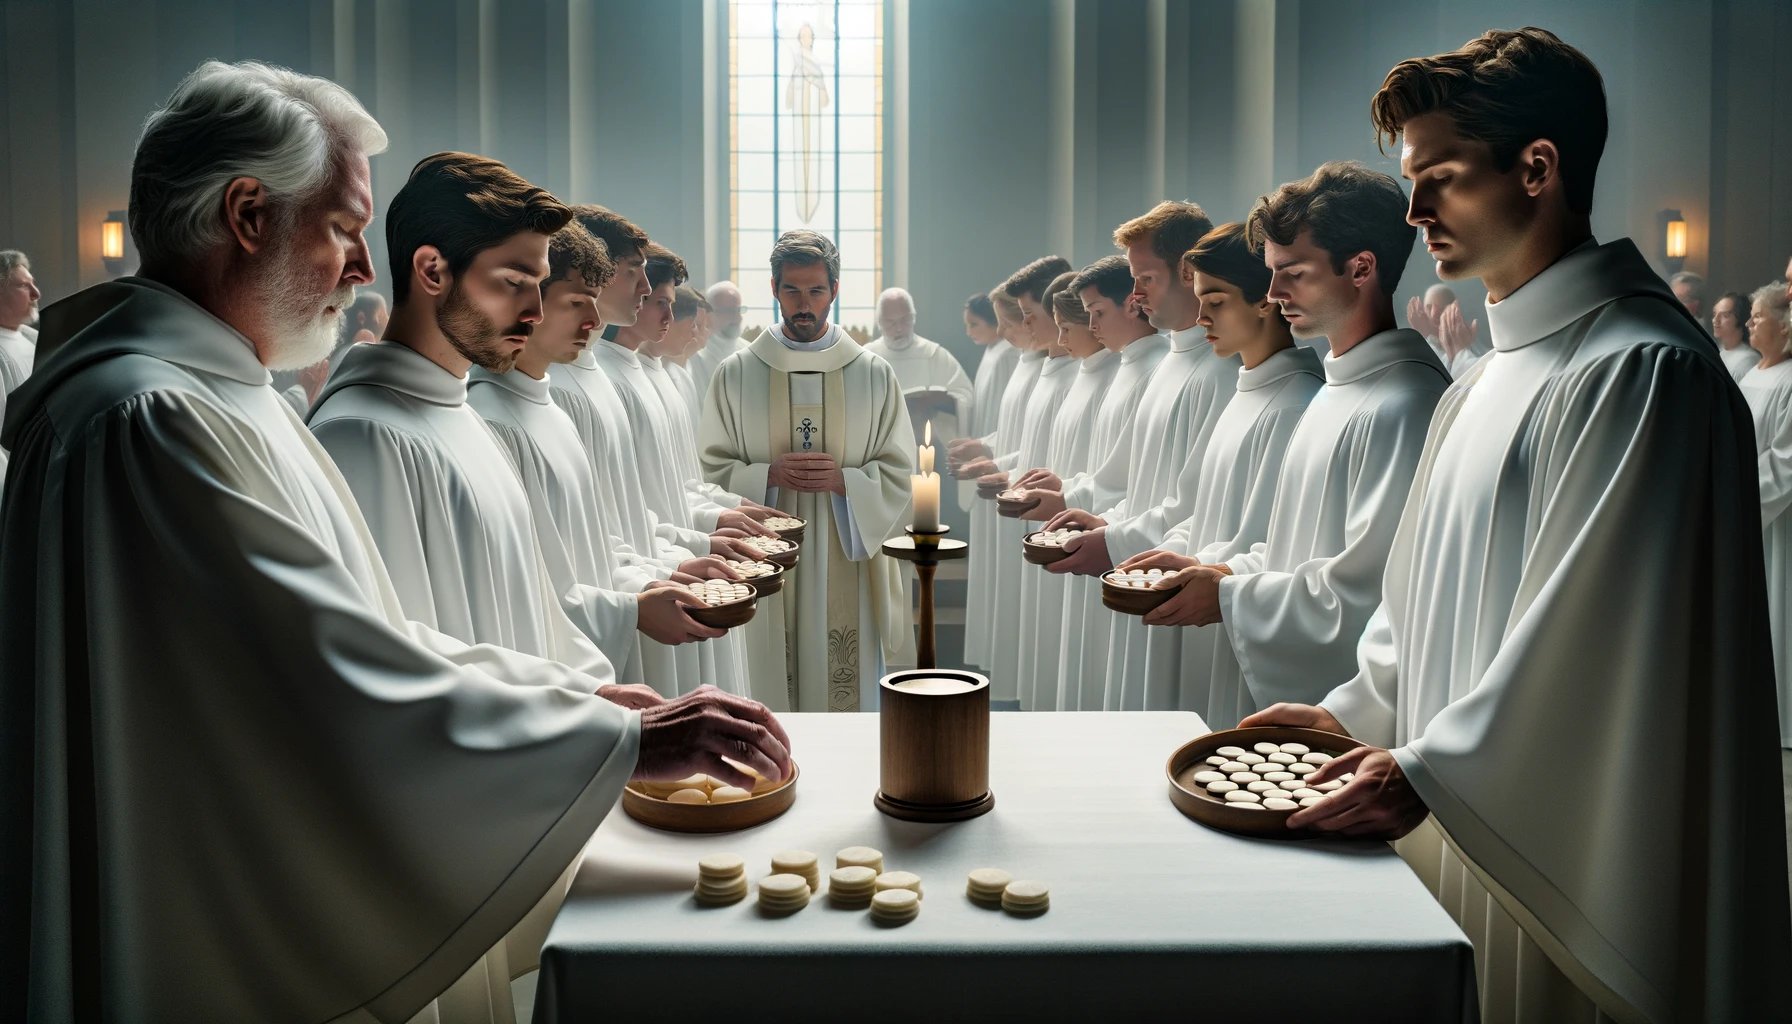 Who Can Assist With Communion In The LCMS?